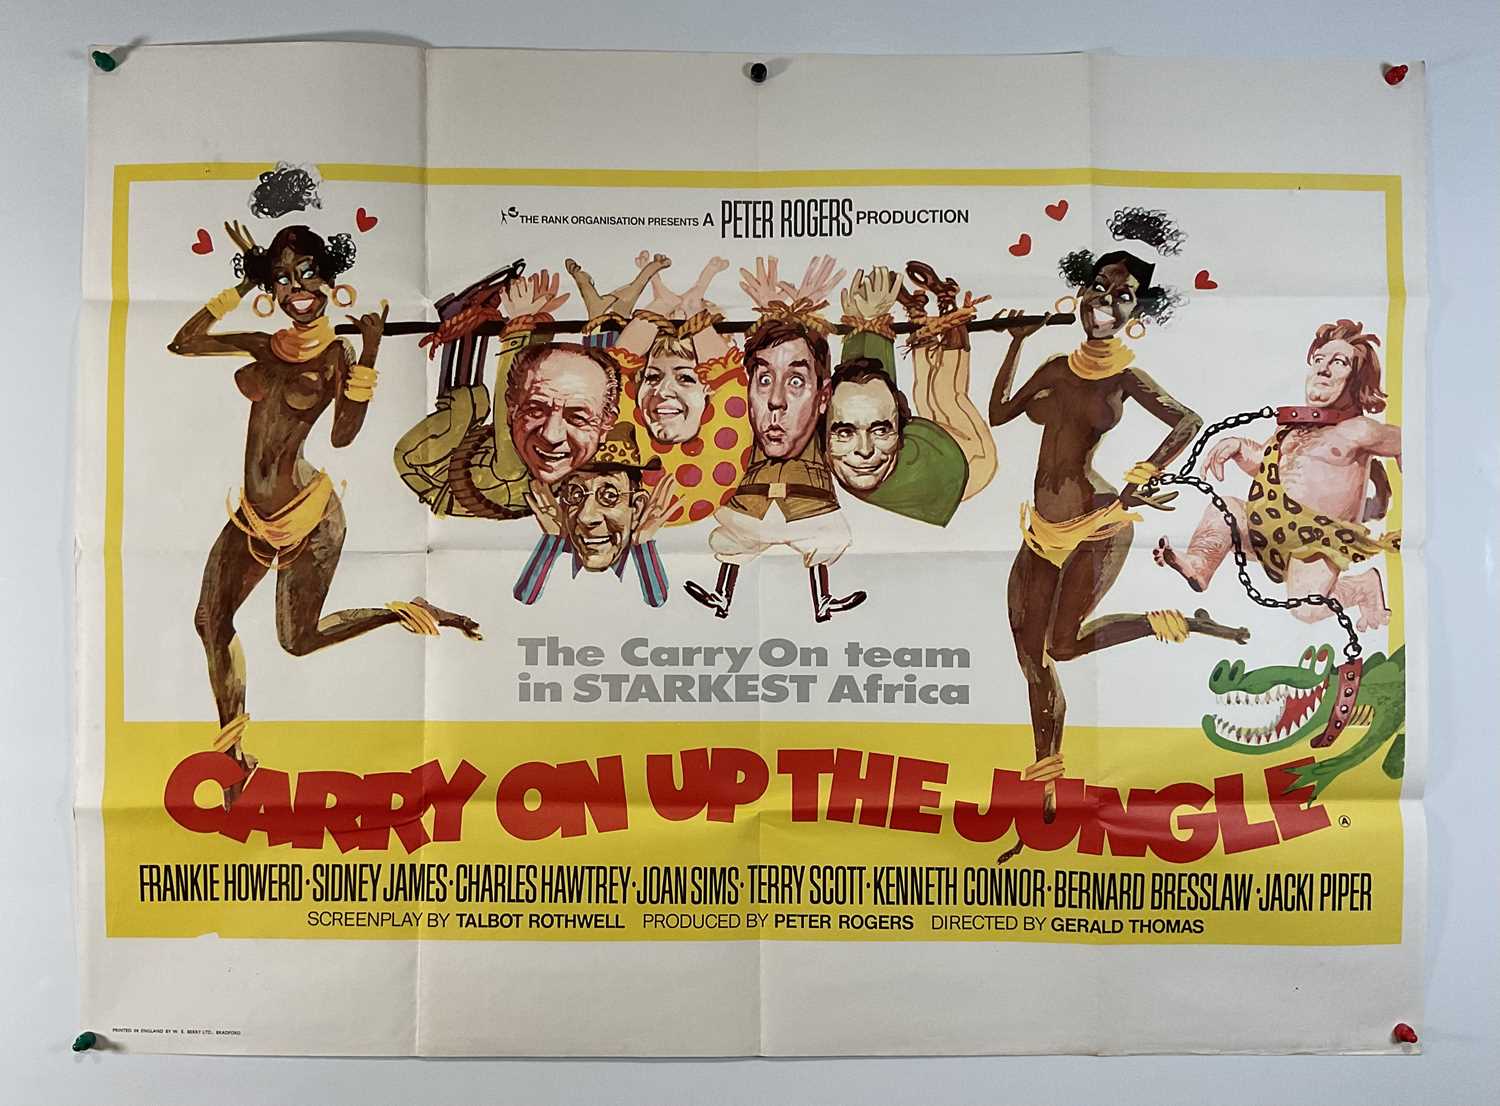 CARRY ON UP THE JUNGLE (1970) UK Quad film poster featuring Renato Fratini artwork, folded.